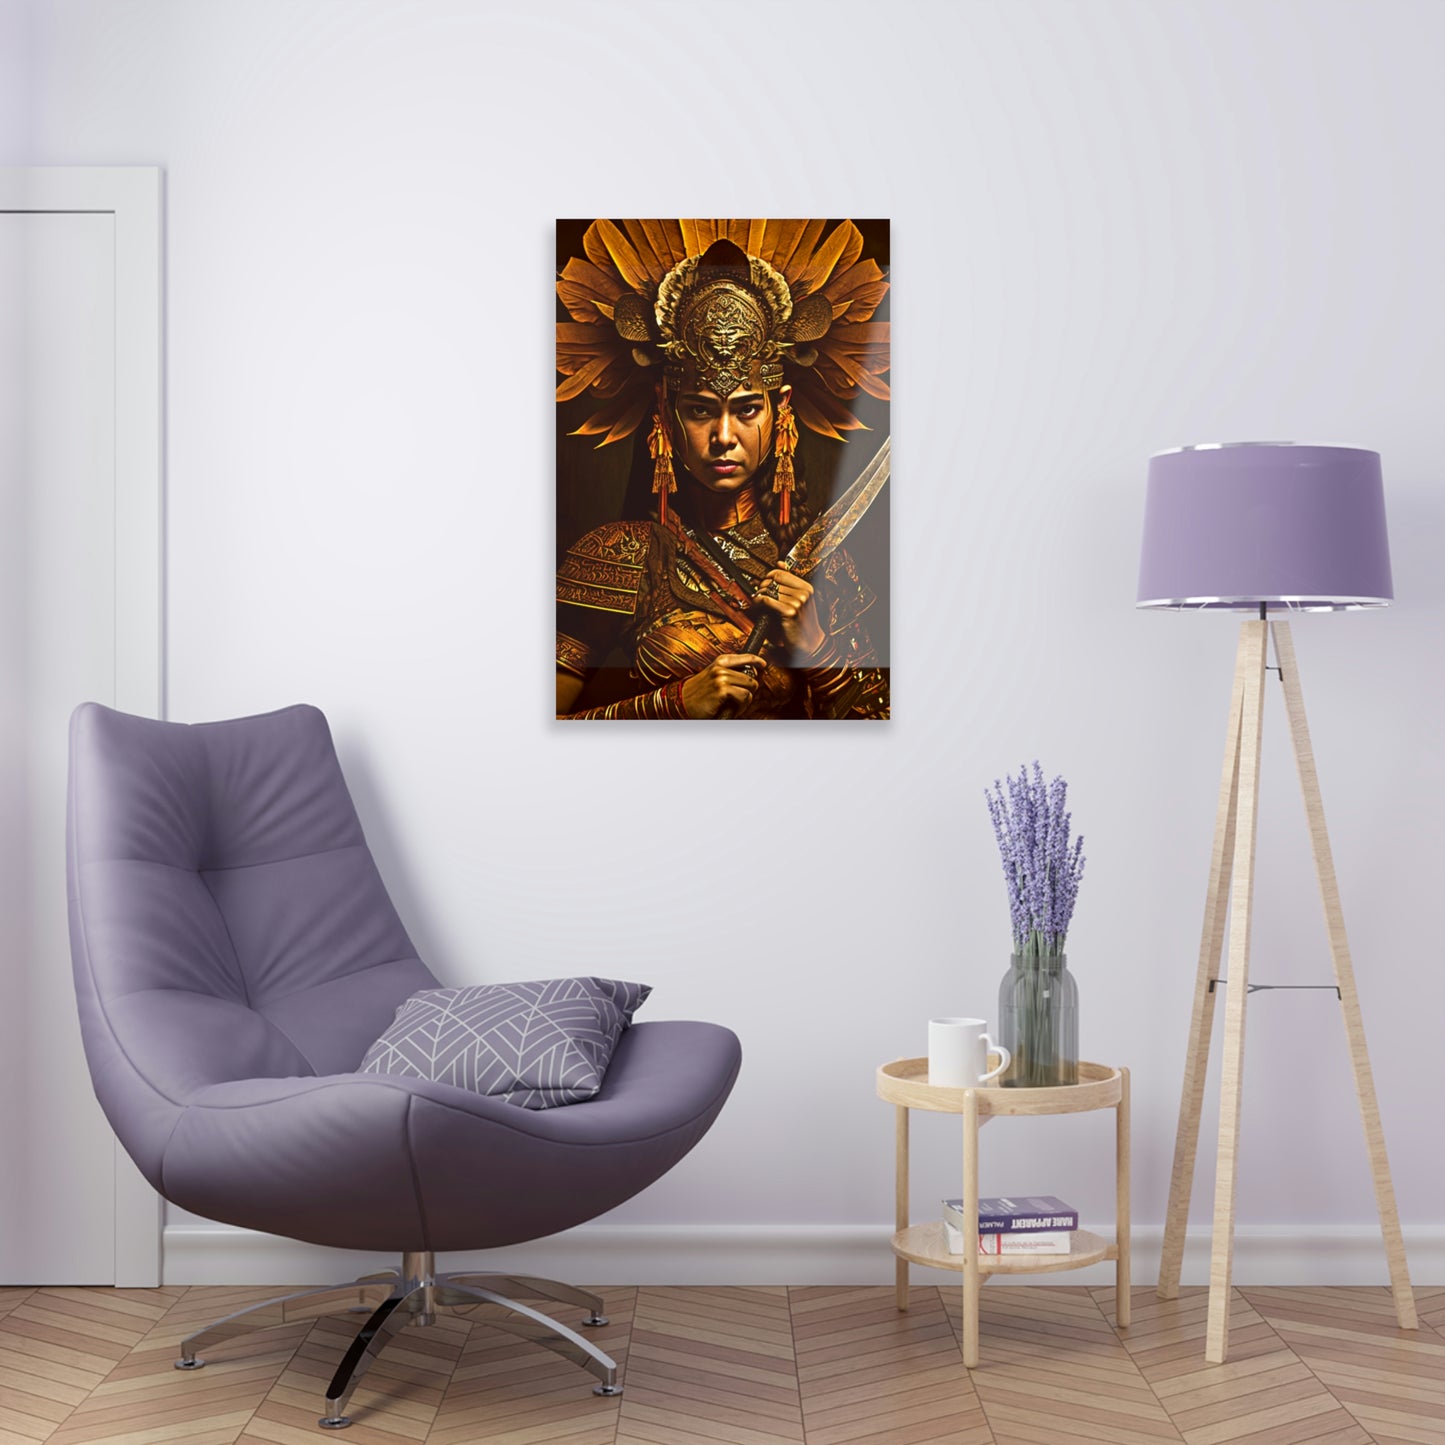 Ceremonial War Garb of the Amazons -  Acrylic Prints